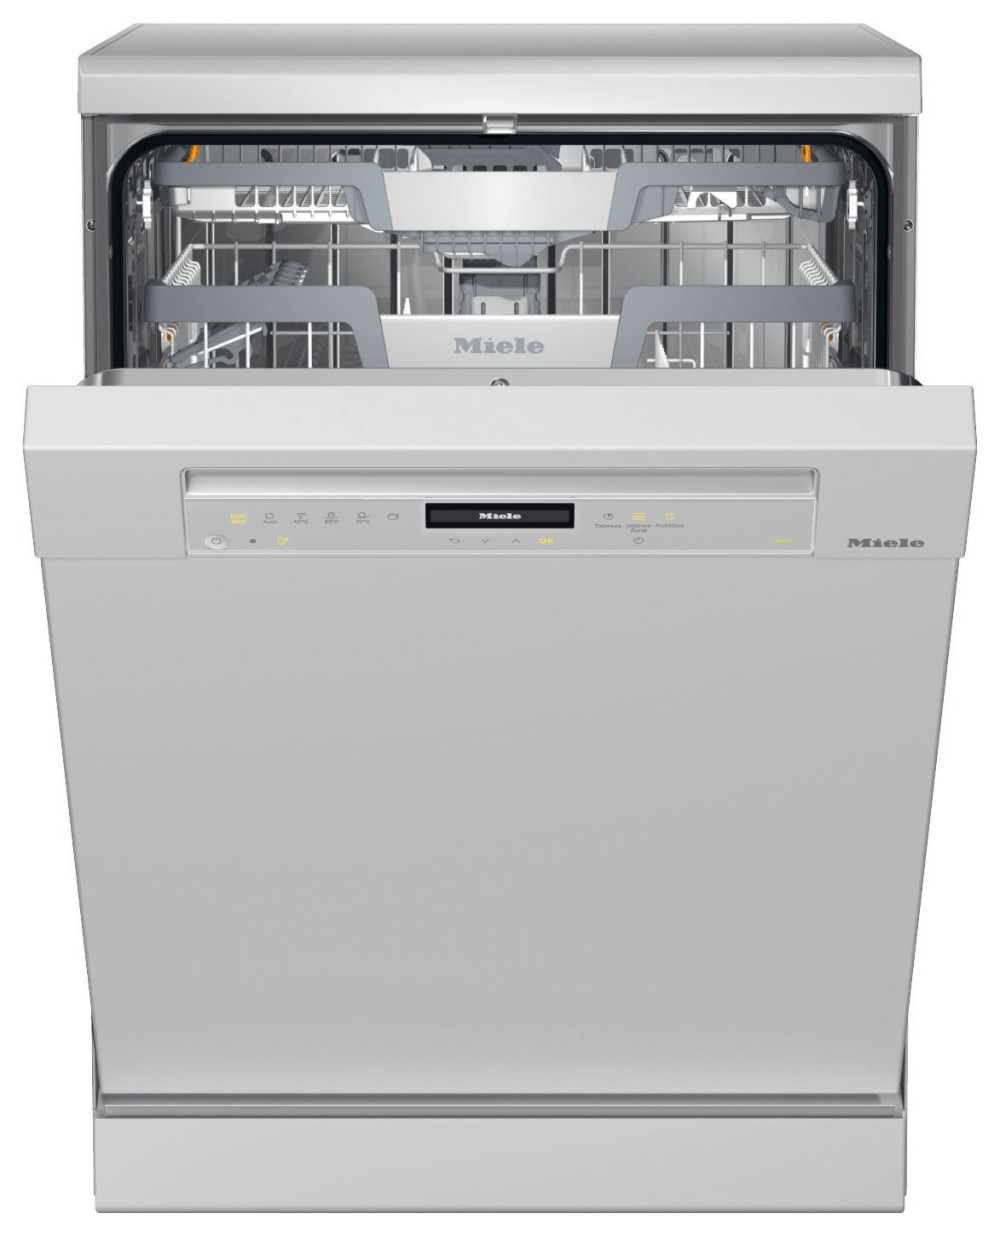 Miele G 7312 SC AutoDos Dishwasher featured image